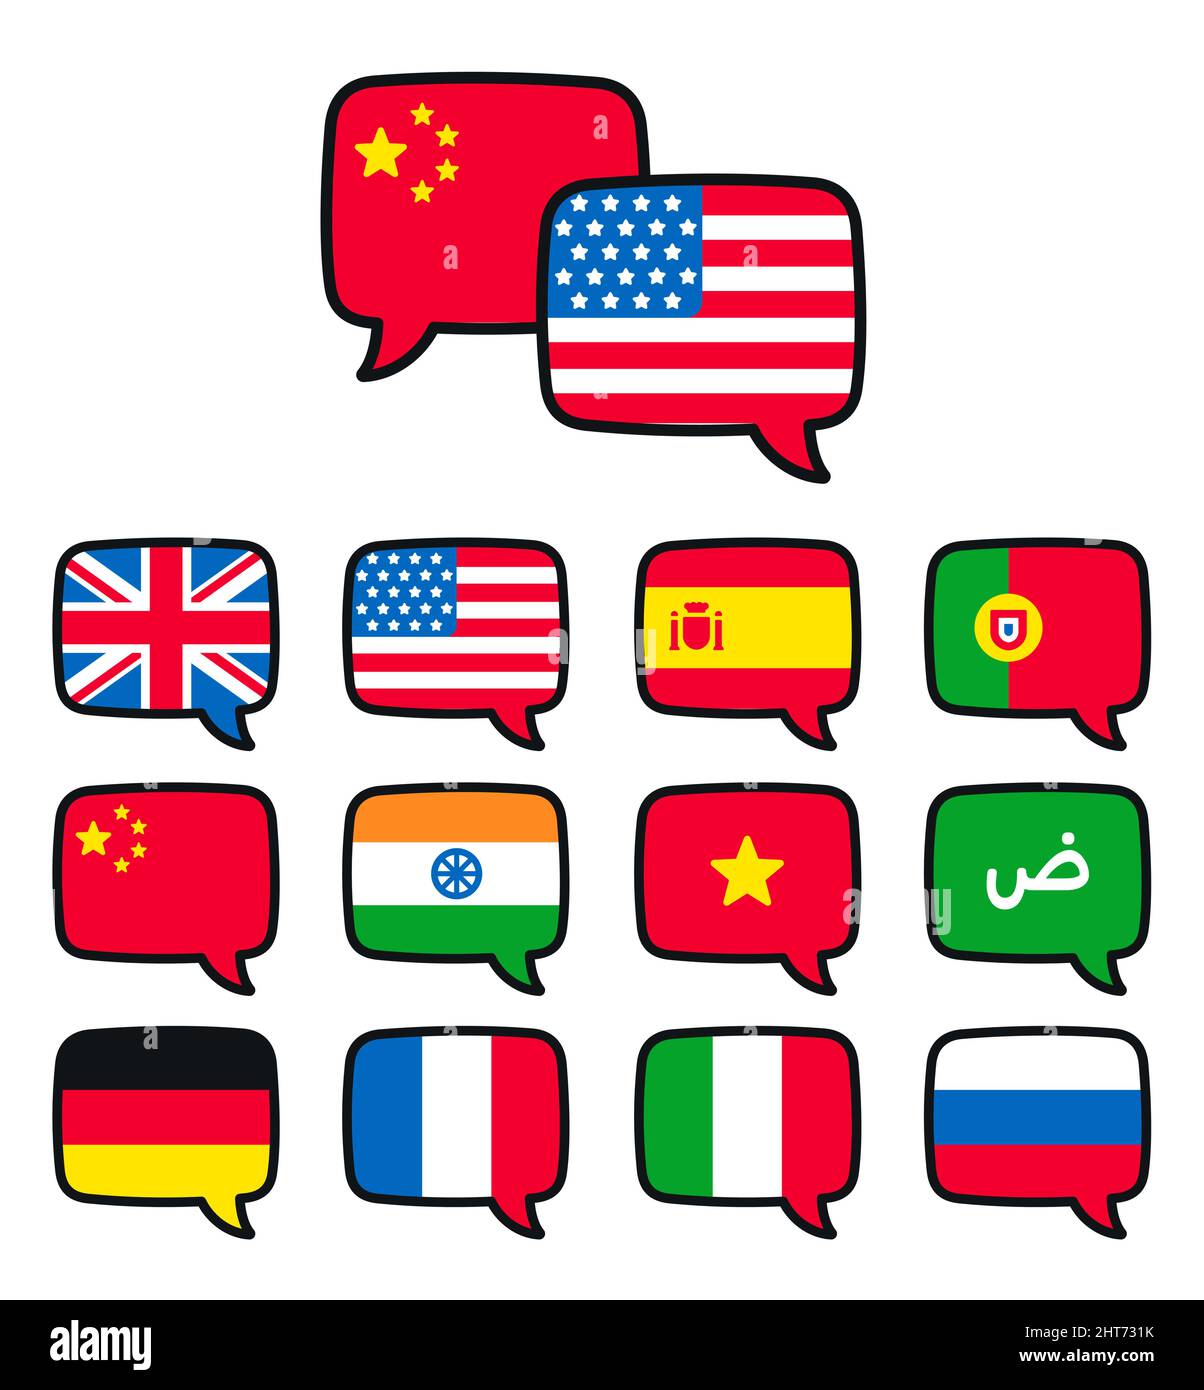 Languages speech bubble icons. Vector country flags set in cartoon style. Translation, communication and international dialogue. Stock Vector